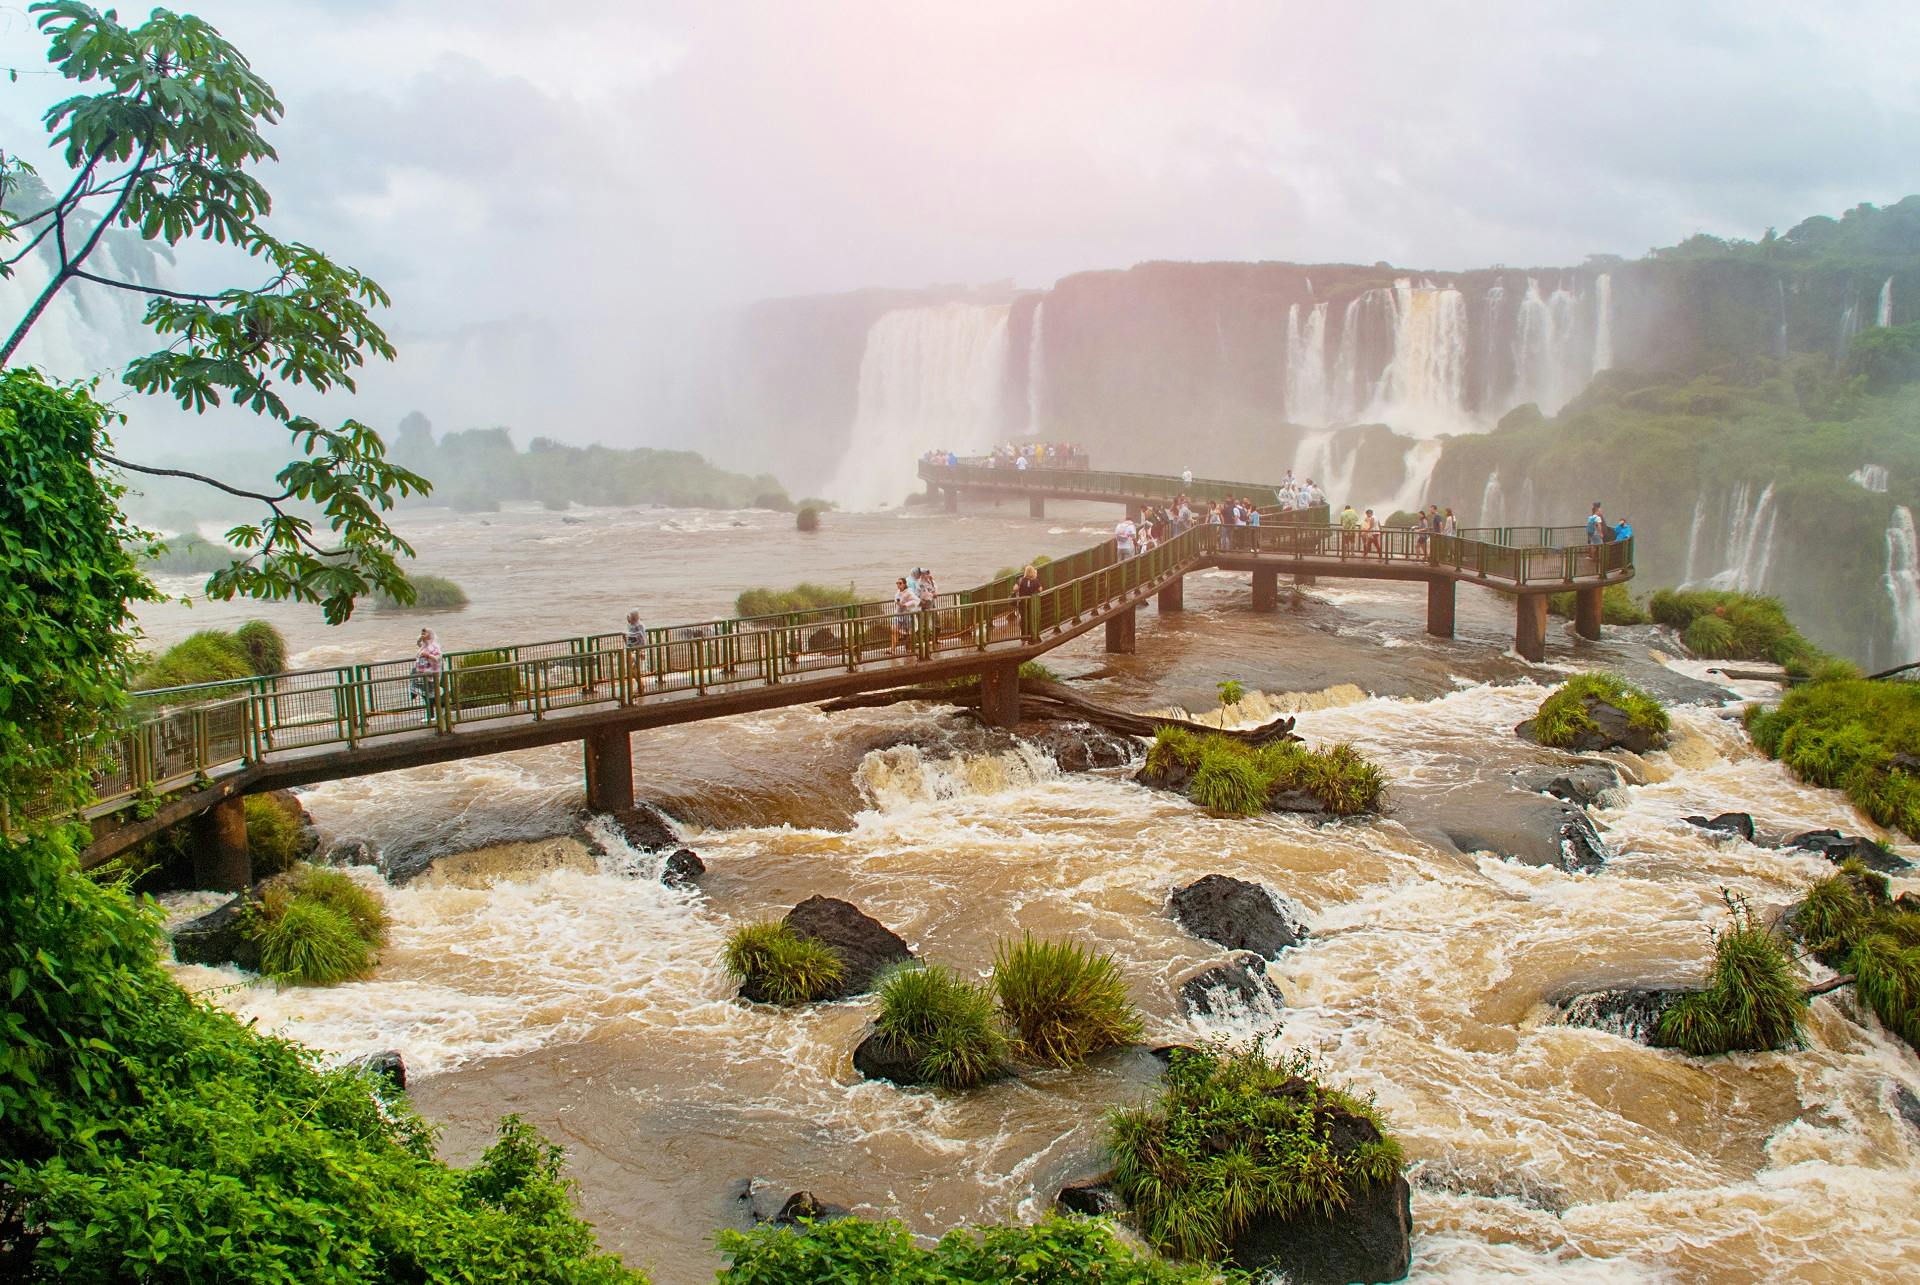 Explore the Majestic Iguassu Falls: Full-Day Tour of Brazilian and Argentinian Sides